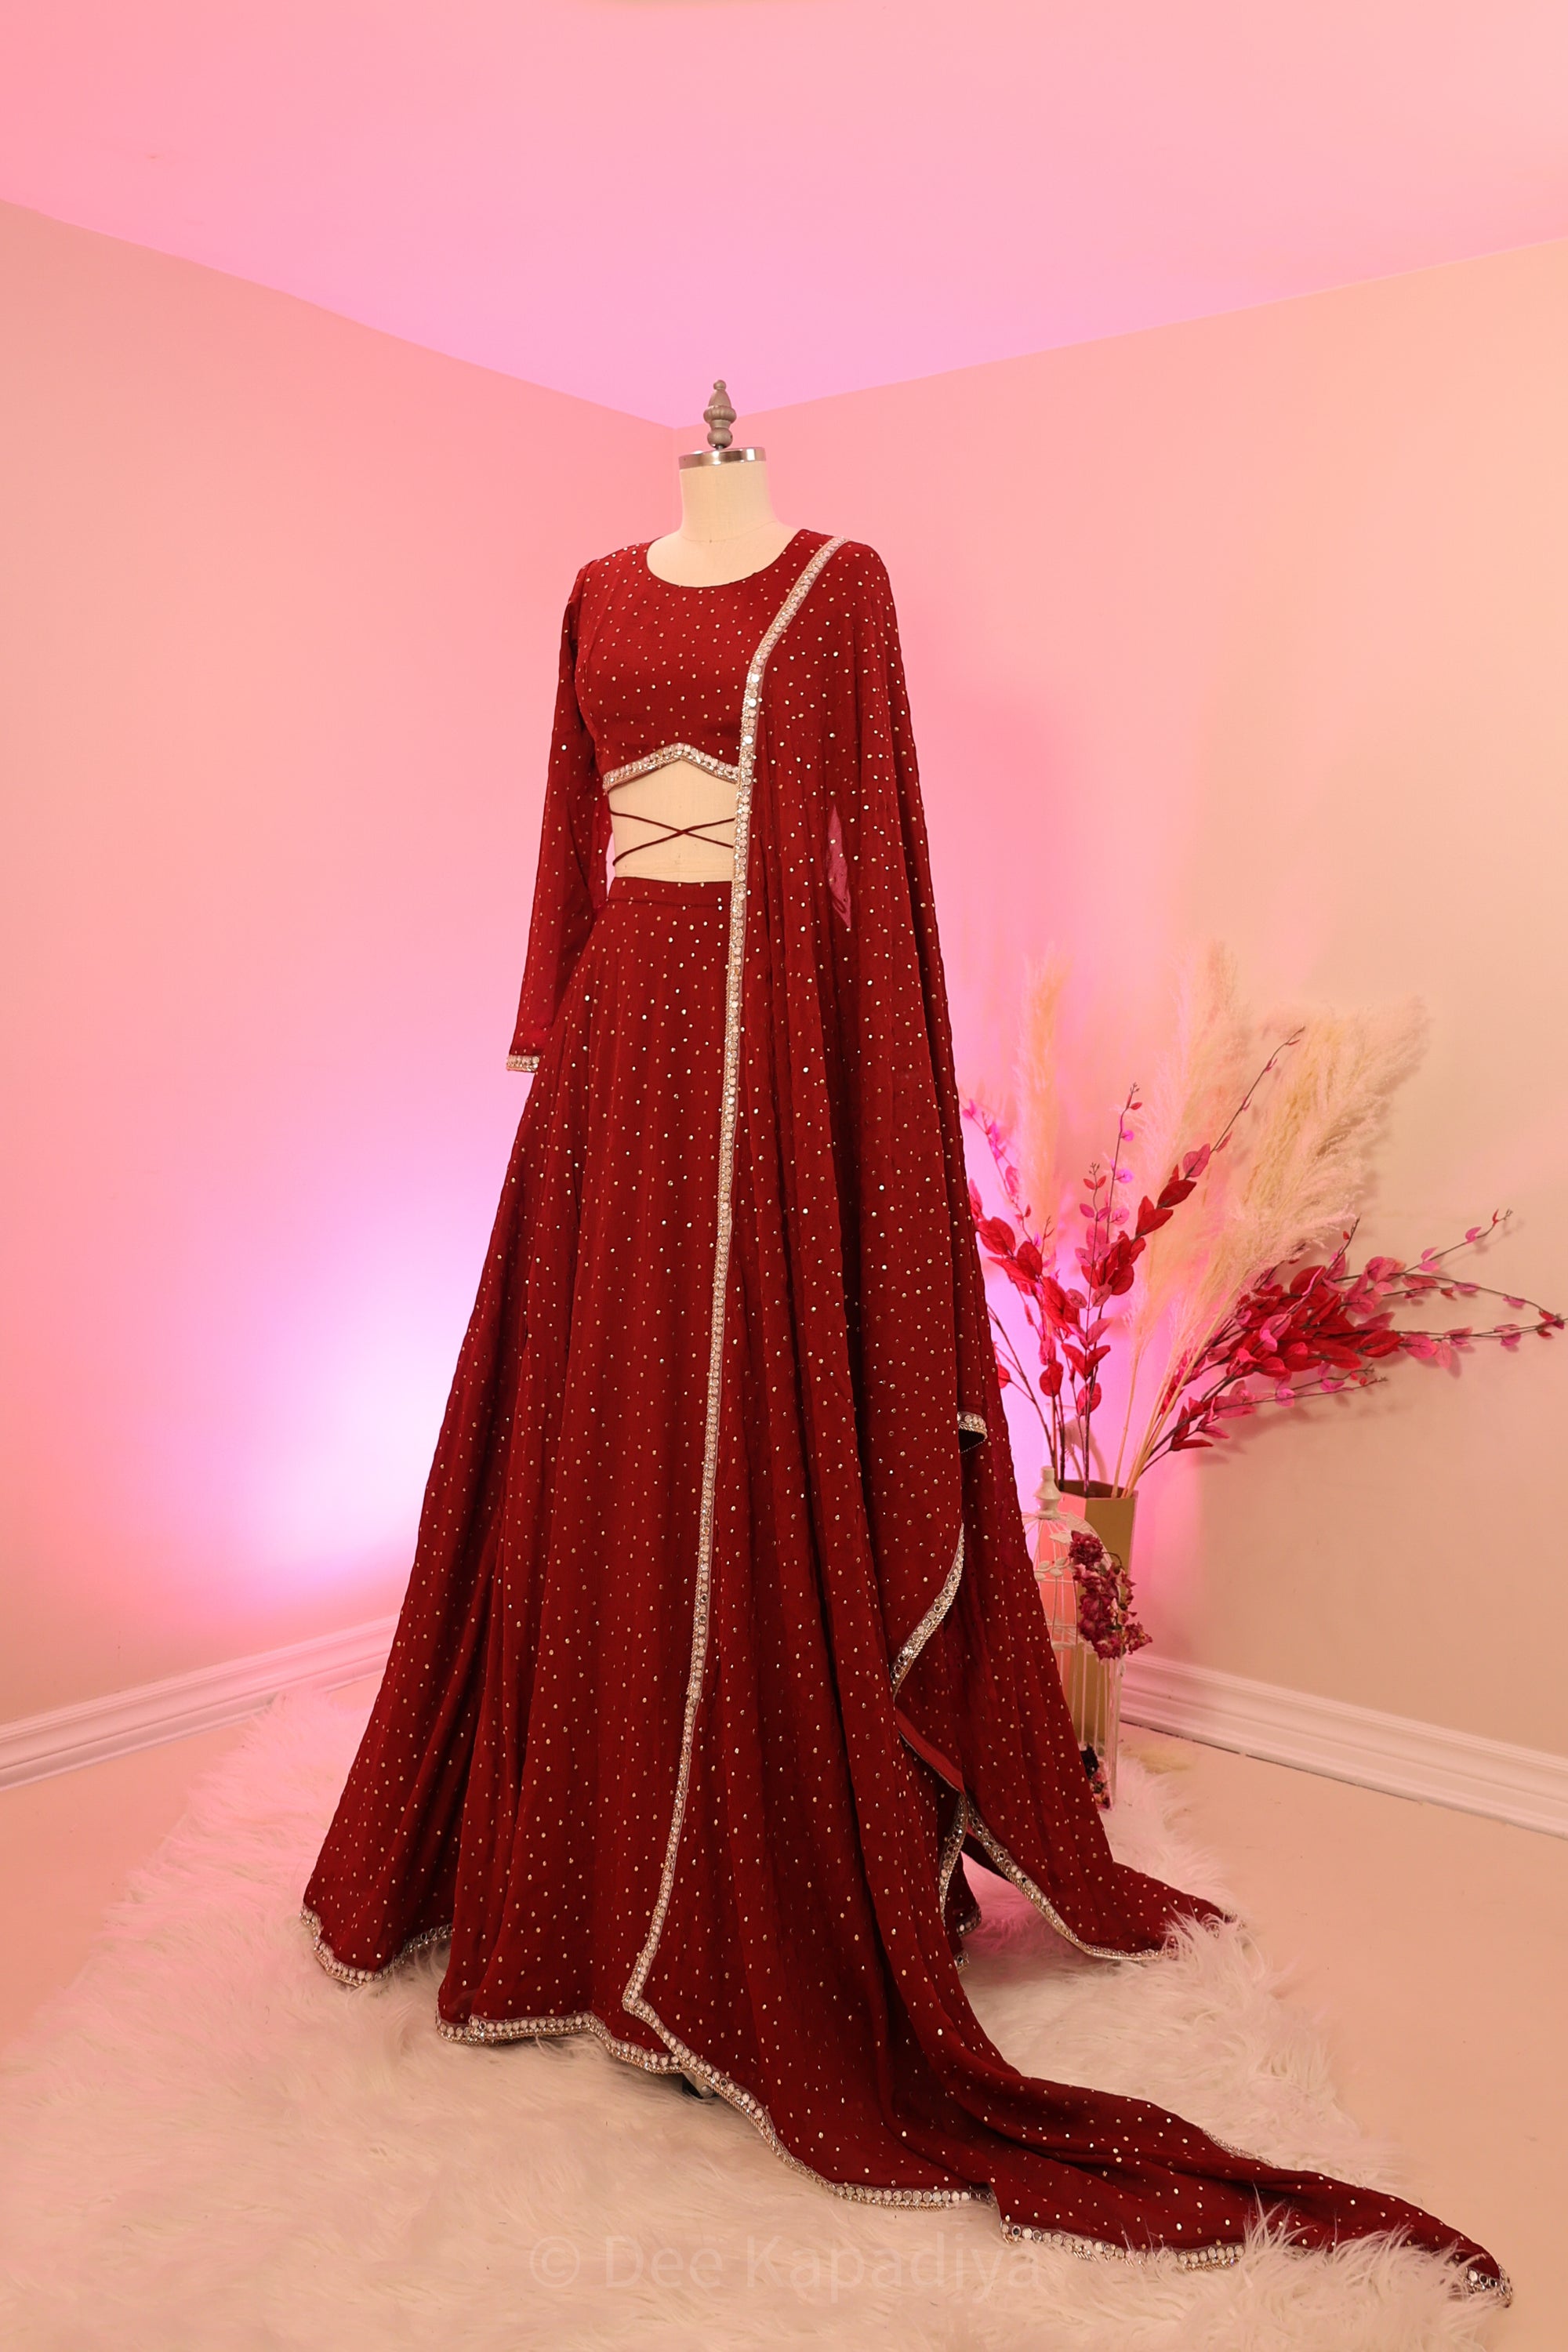 HONEYMOON LEHENGA SET in the most gorgeous deep maroon colour for that perfect classic and elegant look